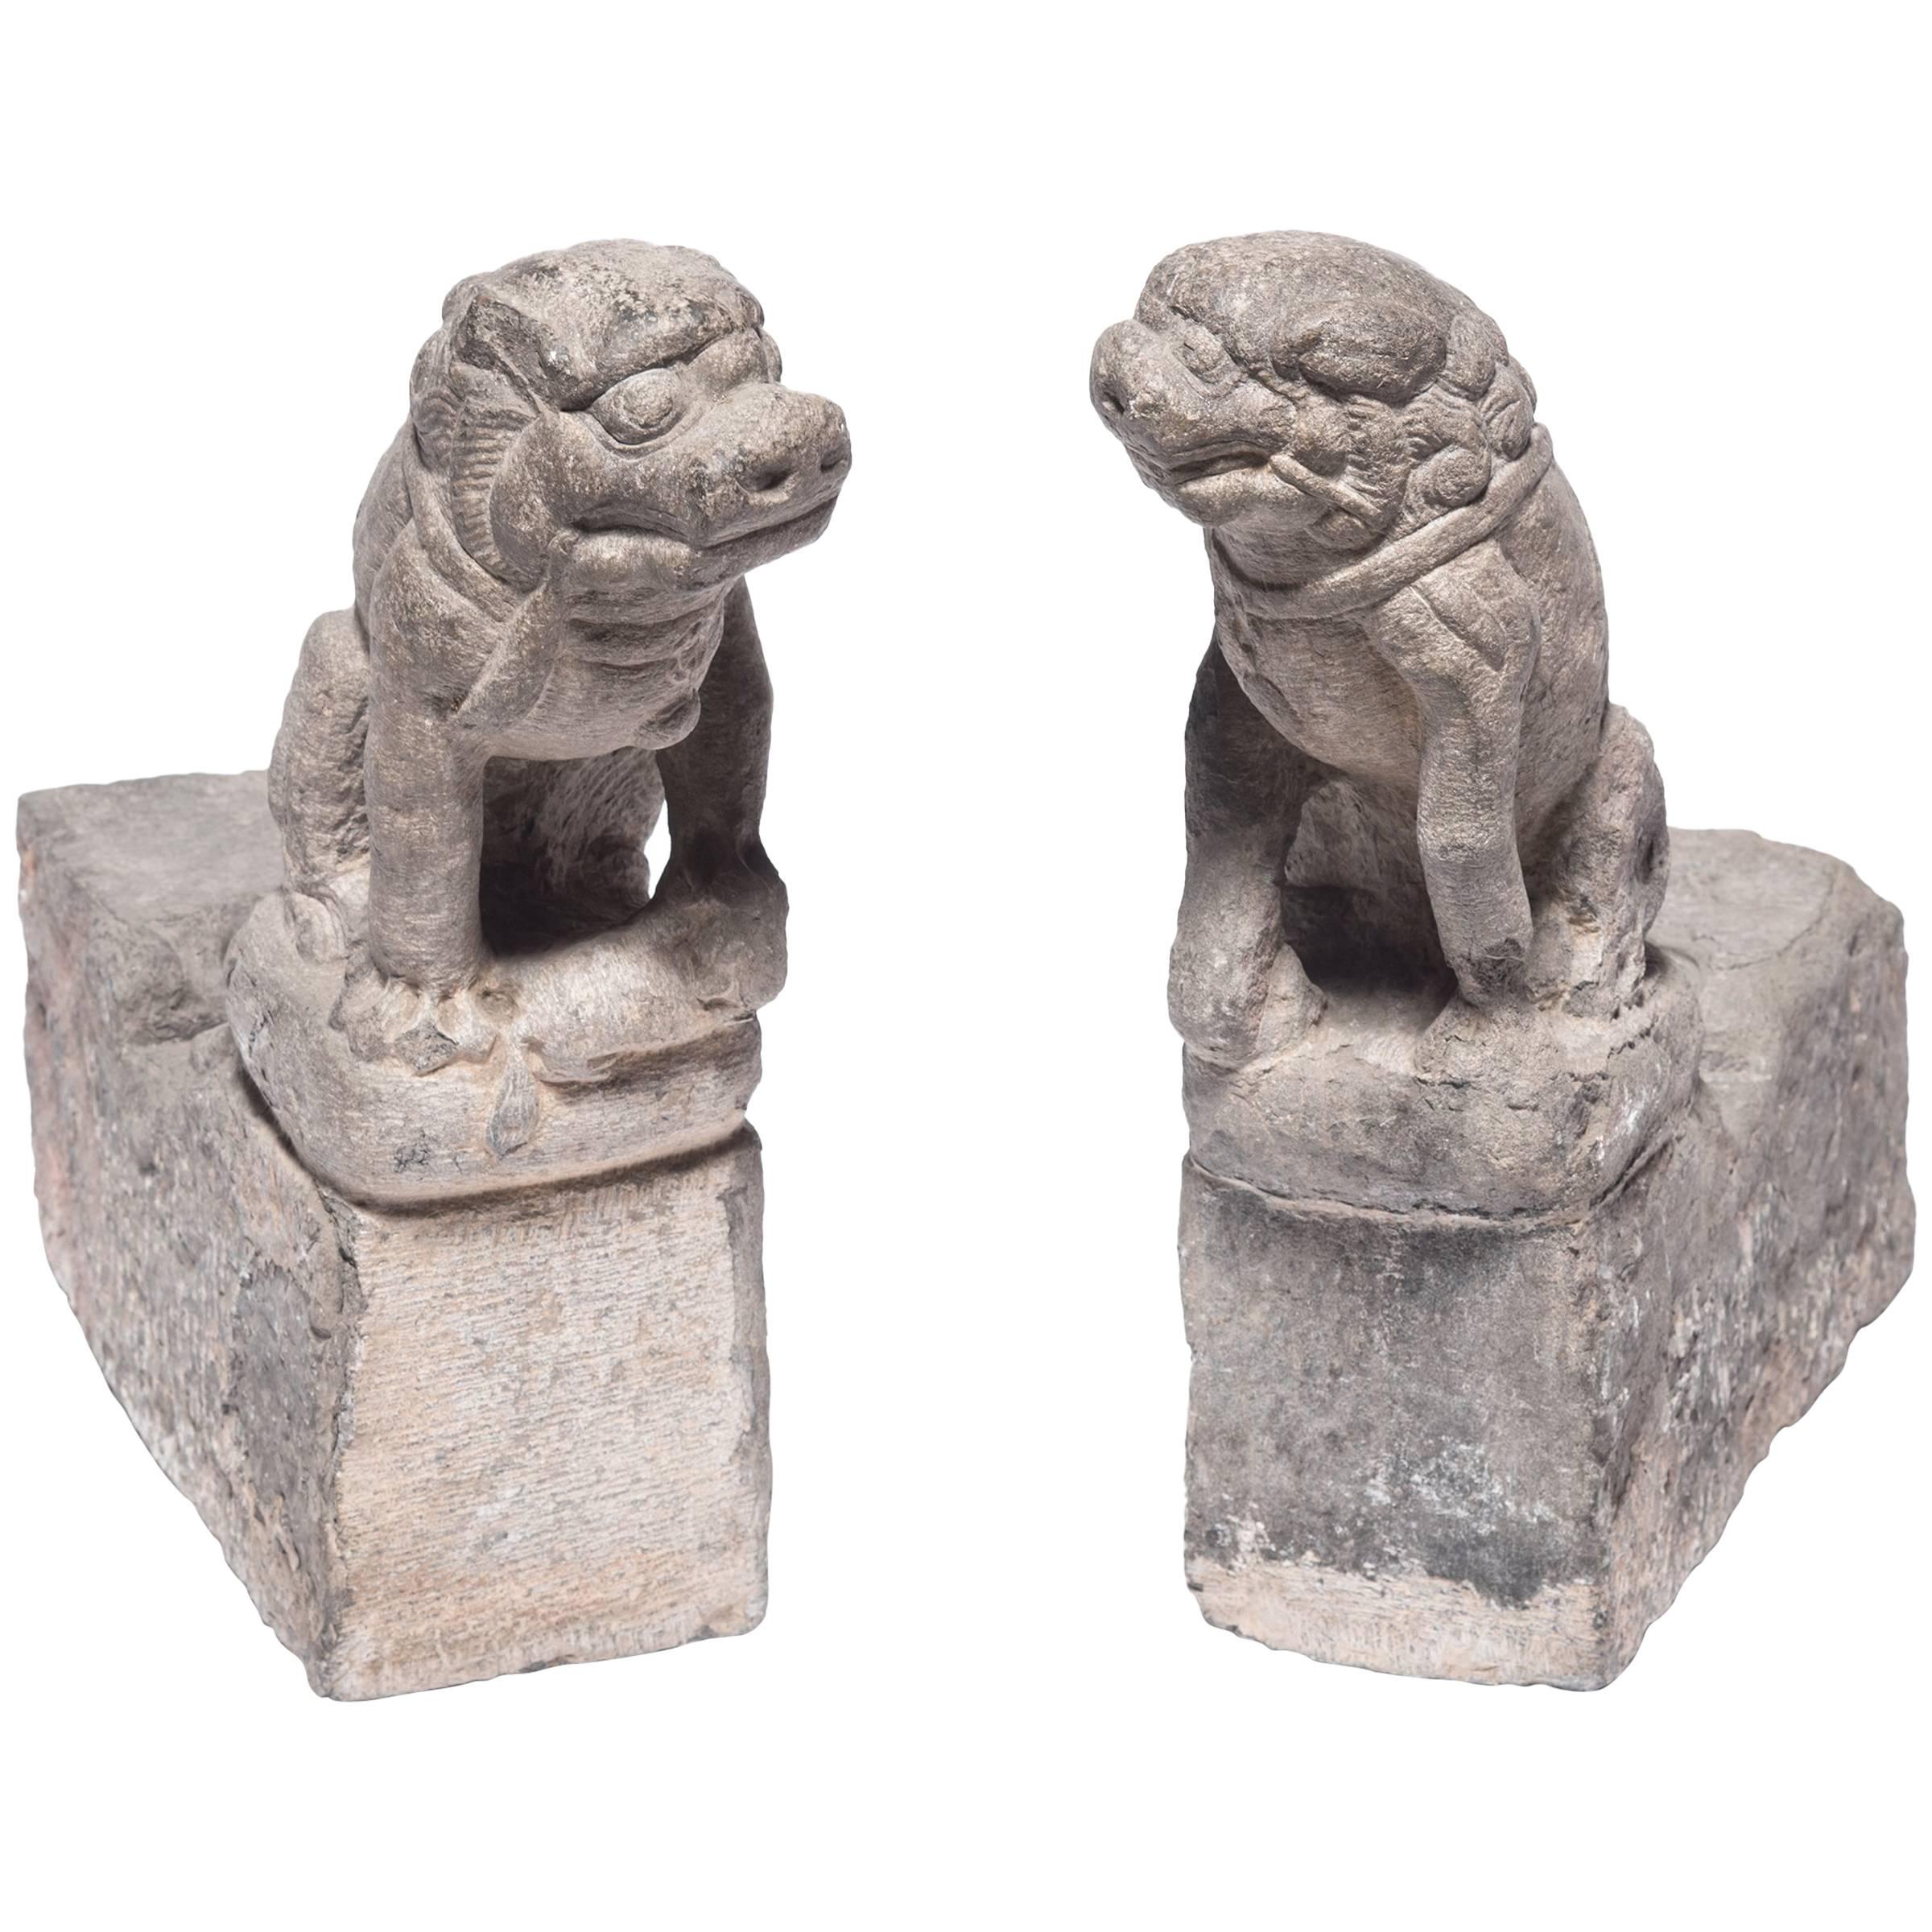 Pair of Early 19th Century Chinese Stone Fu Dogs